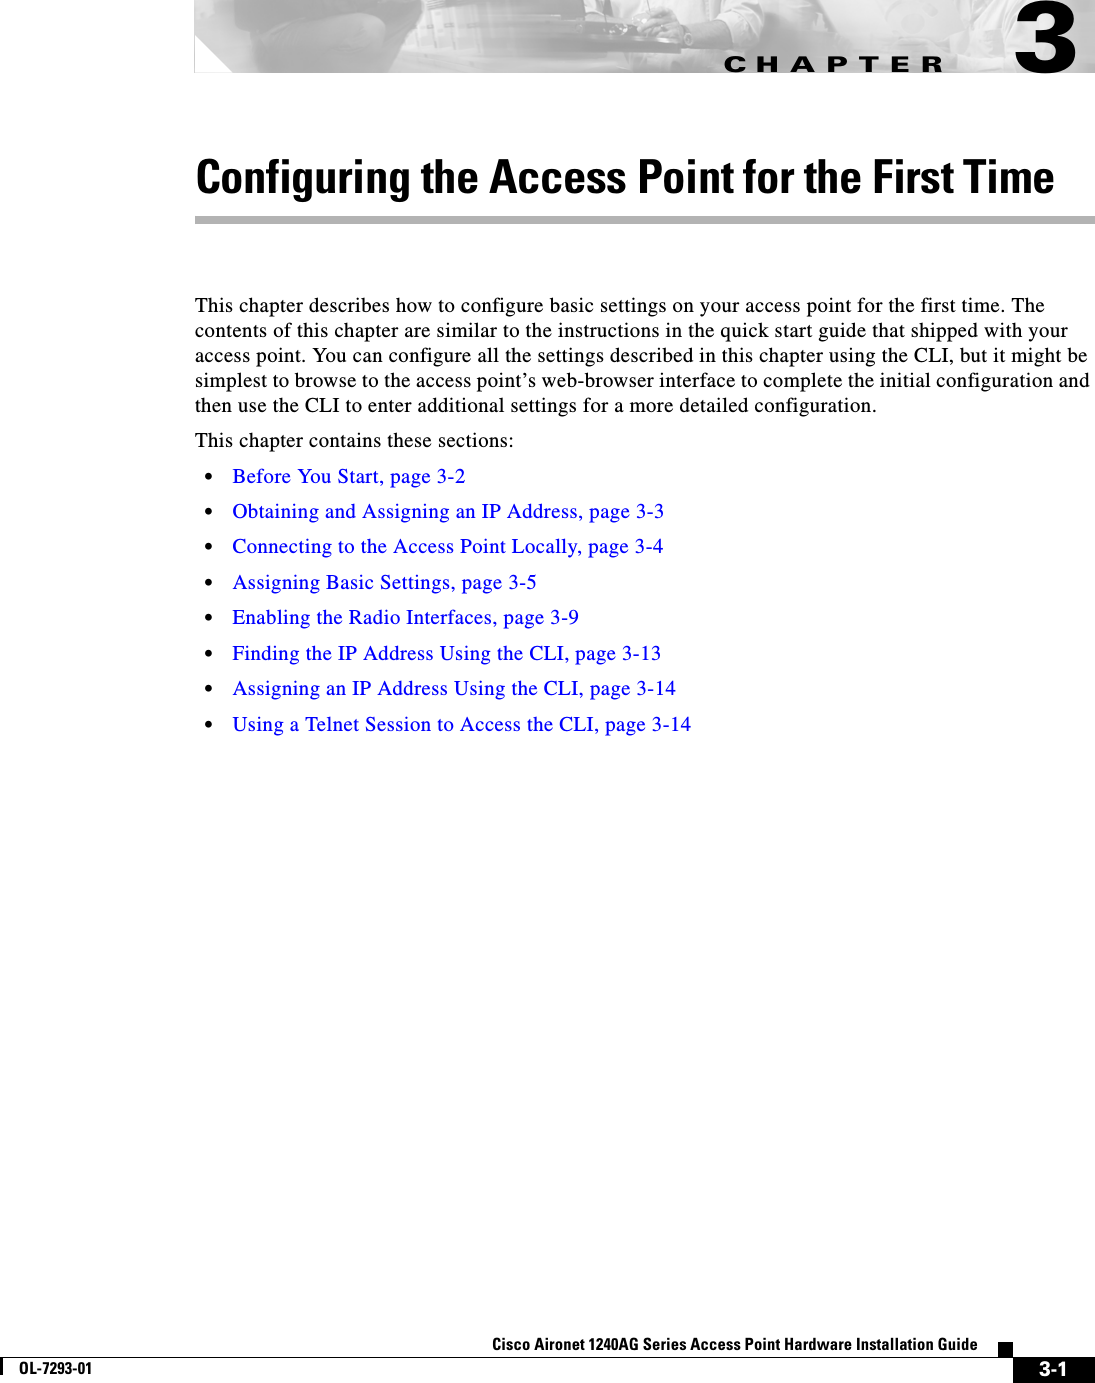 CHAPTER 3-1Cisco Aironet 1240AG Series Access Point Hardware Installation GuideOL-7293-013Configuring the Access Point for the First TimeThis chapter describes how to configure basic settings on your access point for the first time. The contents of this chapter are similar to the instructions in the quick start guide that shipped with your access point. You can configure all the settings described in this chapter using the CLI, but it might be simplest to browse to the access point’s web-browser interface to complete the initial configuration and then use the CLI to enter additional settings for a more detailed configuration. This chapter contains these sections:•Before You Start, page 3-2•Obtaining and Assigning an IP Address, page 3-3•Connecting to the Access Point Locally, page 3-4•Assigning Basic Settings, page 3-5•Enabling the Radio Interfaces, page 3-9•Finding the IP Address Using the CLI, page 3-13•Assigning an IP Address Using the CLI, page 3-14•Using a Telnet Session to Access the CLI, page 3-14